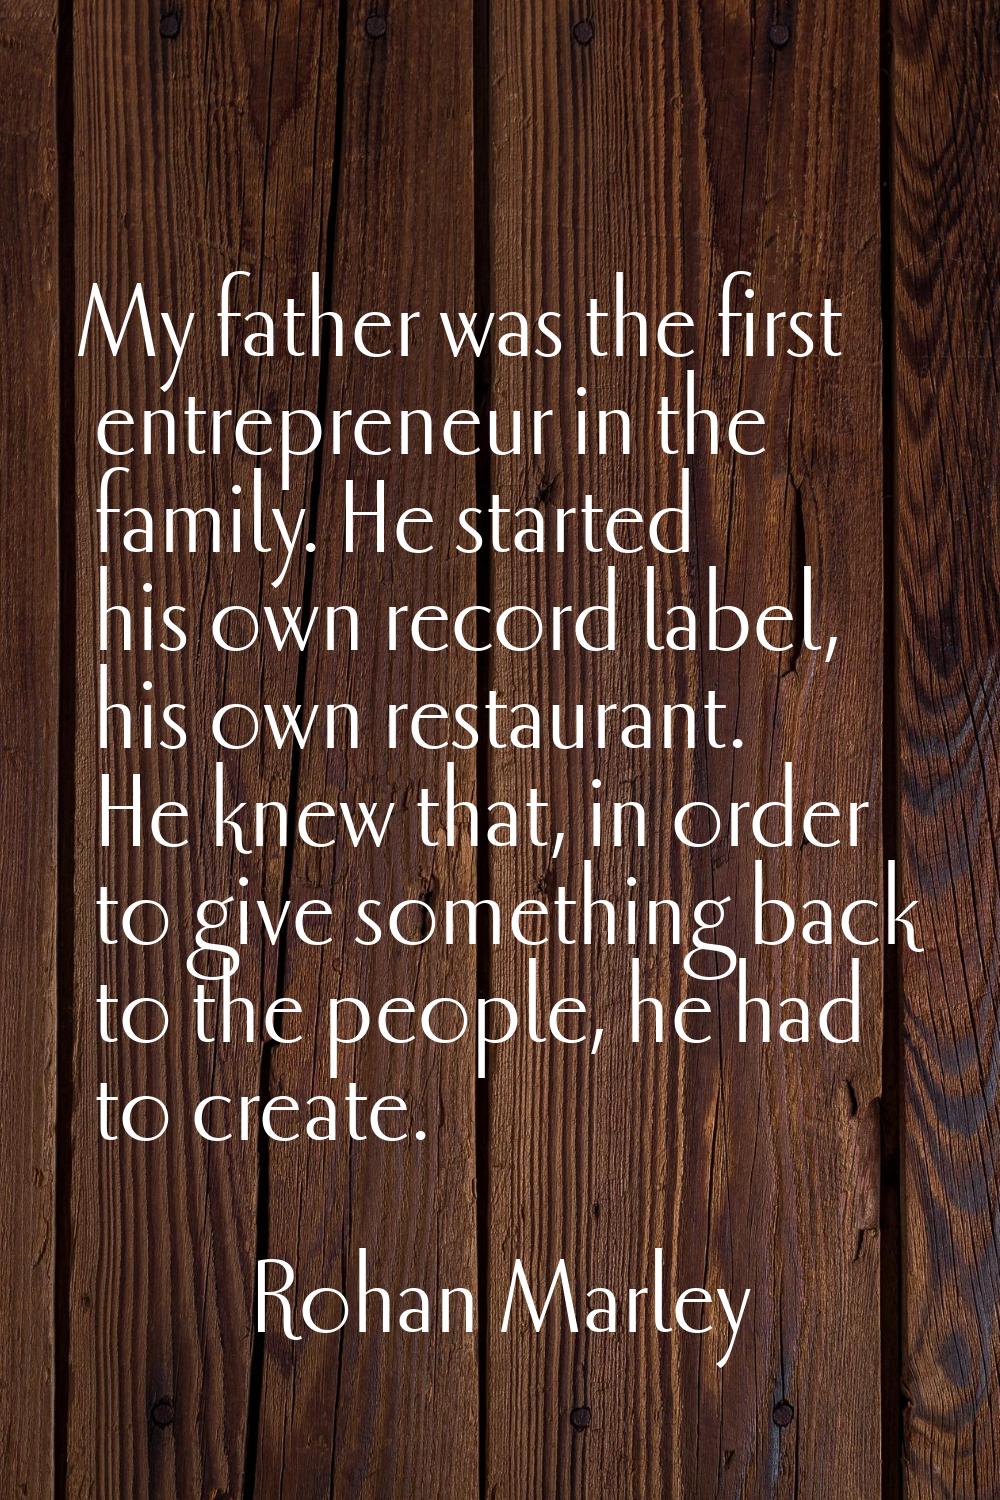 My father was the first entrepreneur in the family. He started his own record label, his own restau